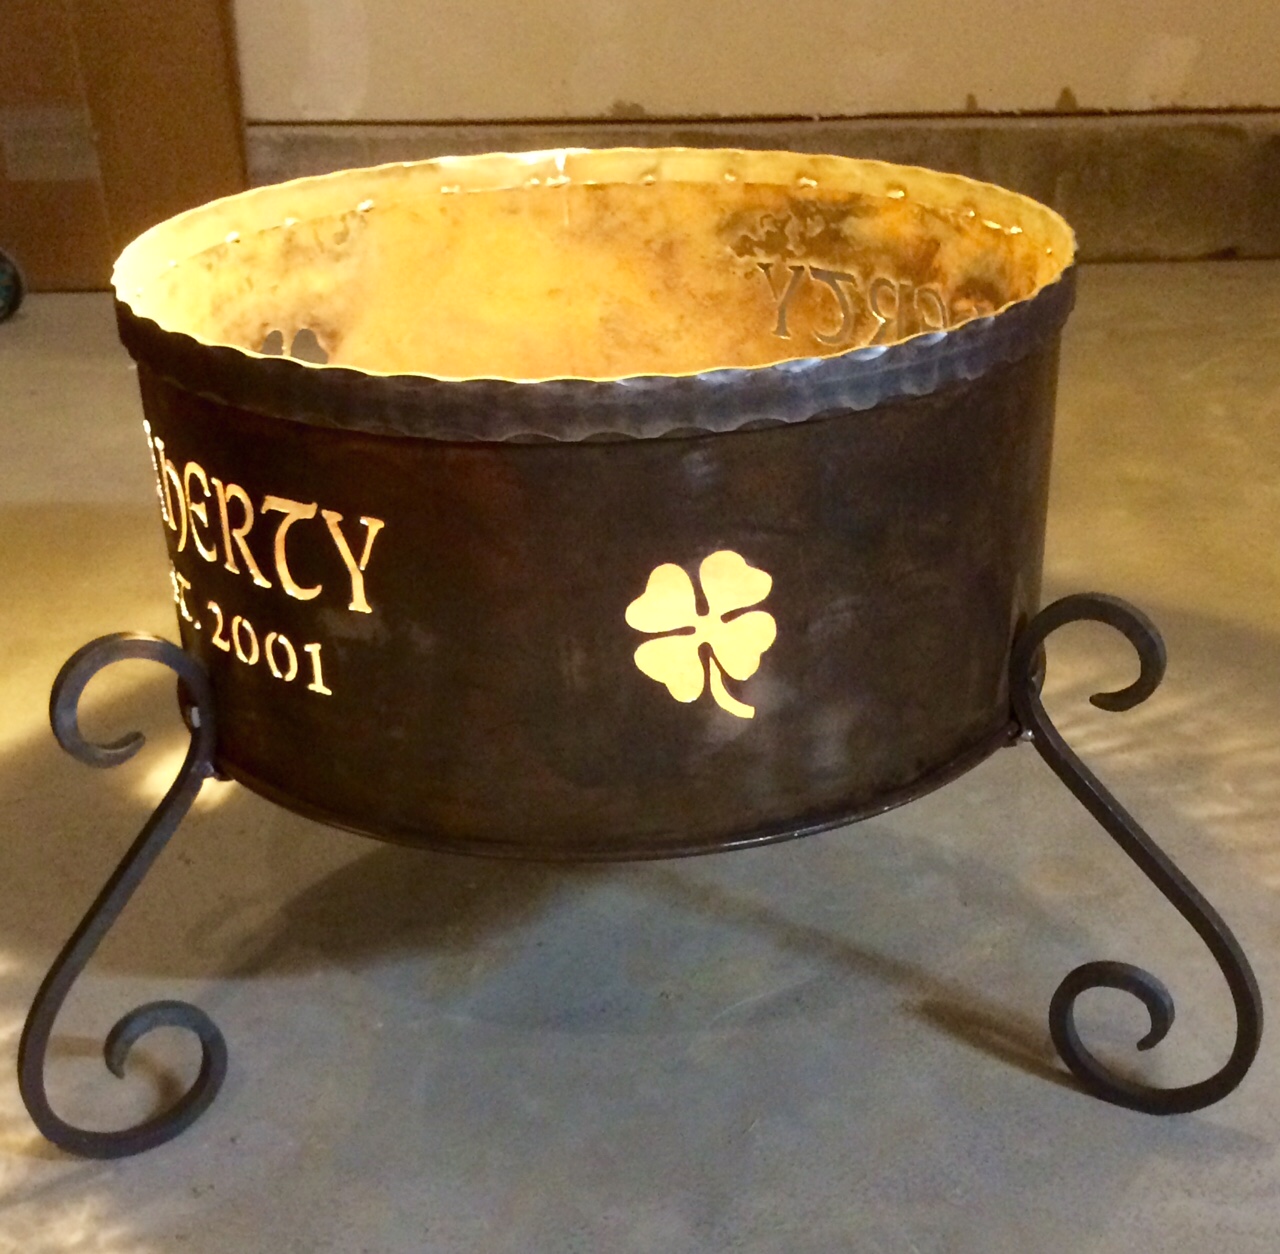 Personalized Fire Pits Have Your, Celtic Fire Pit